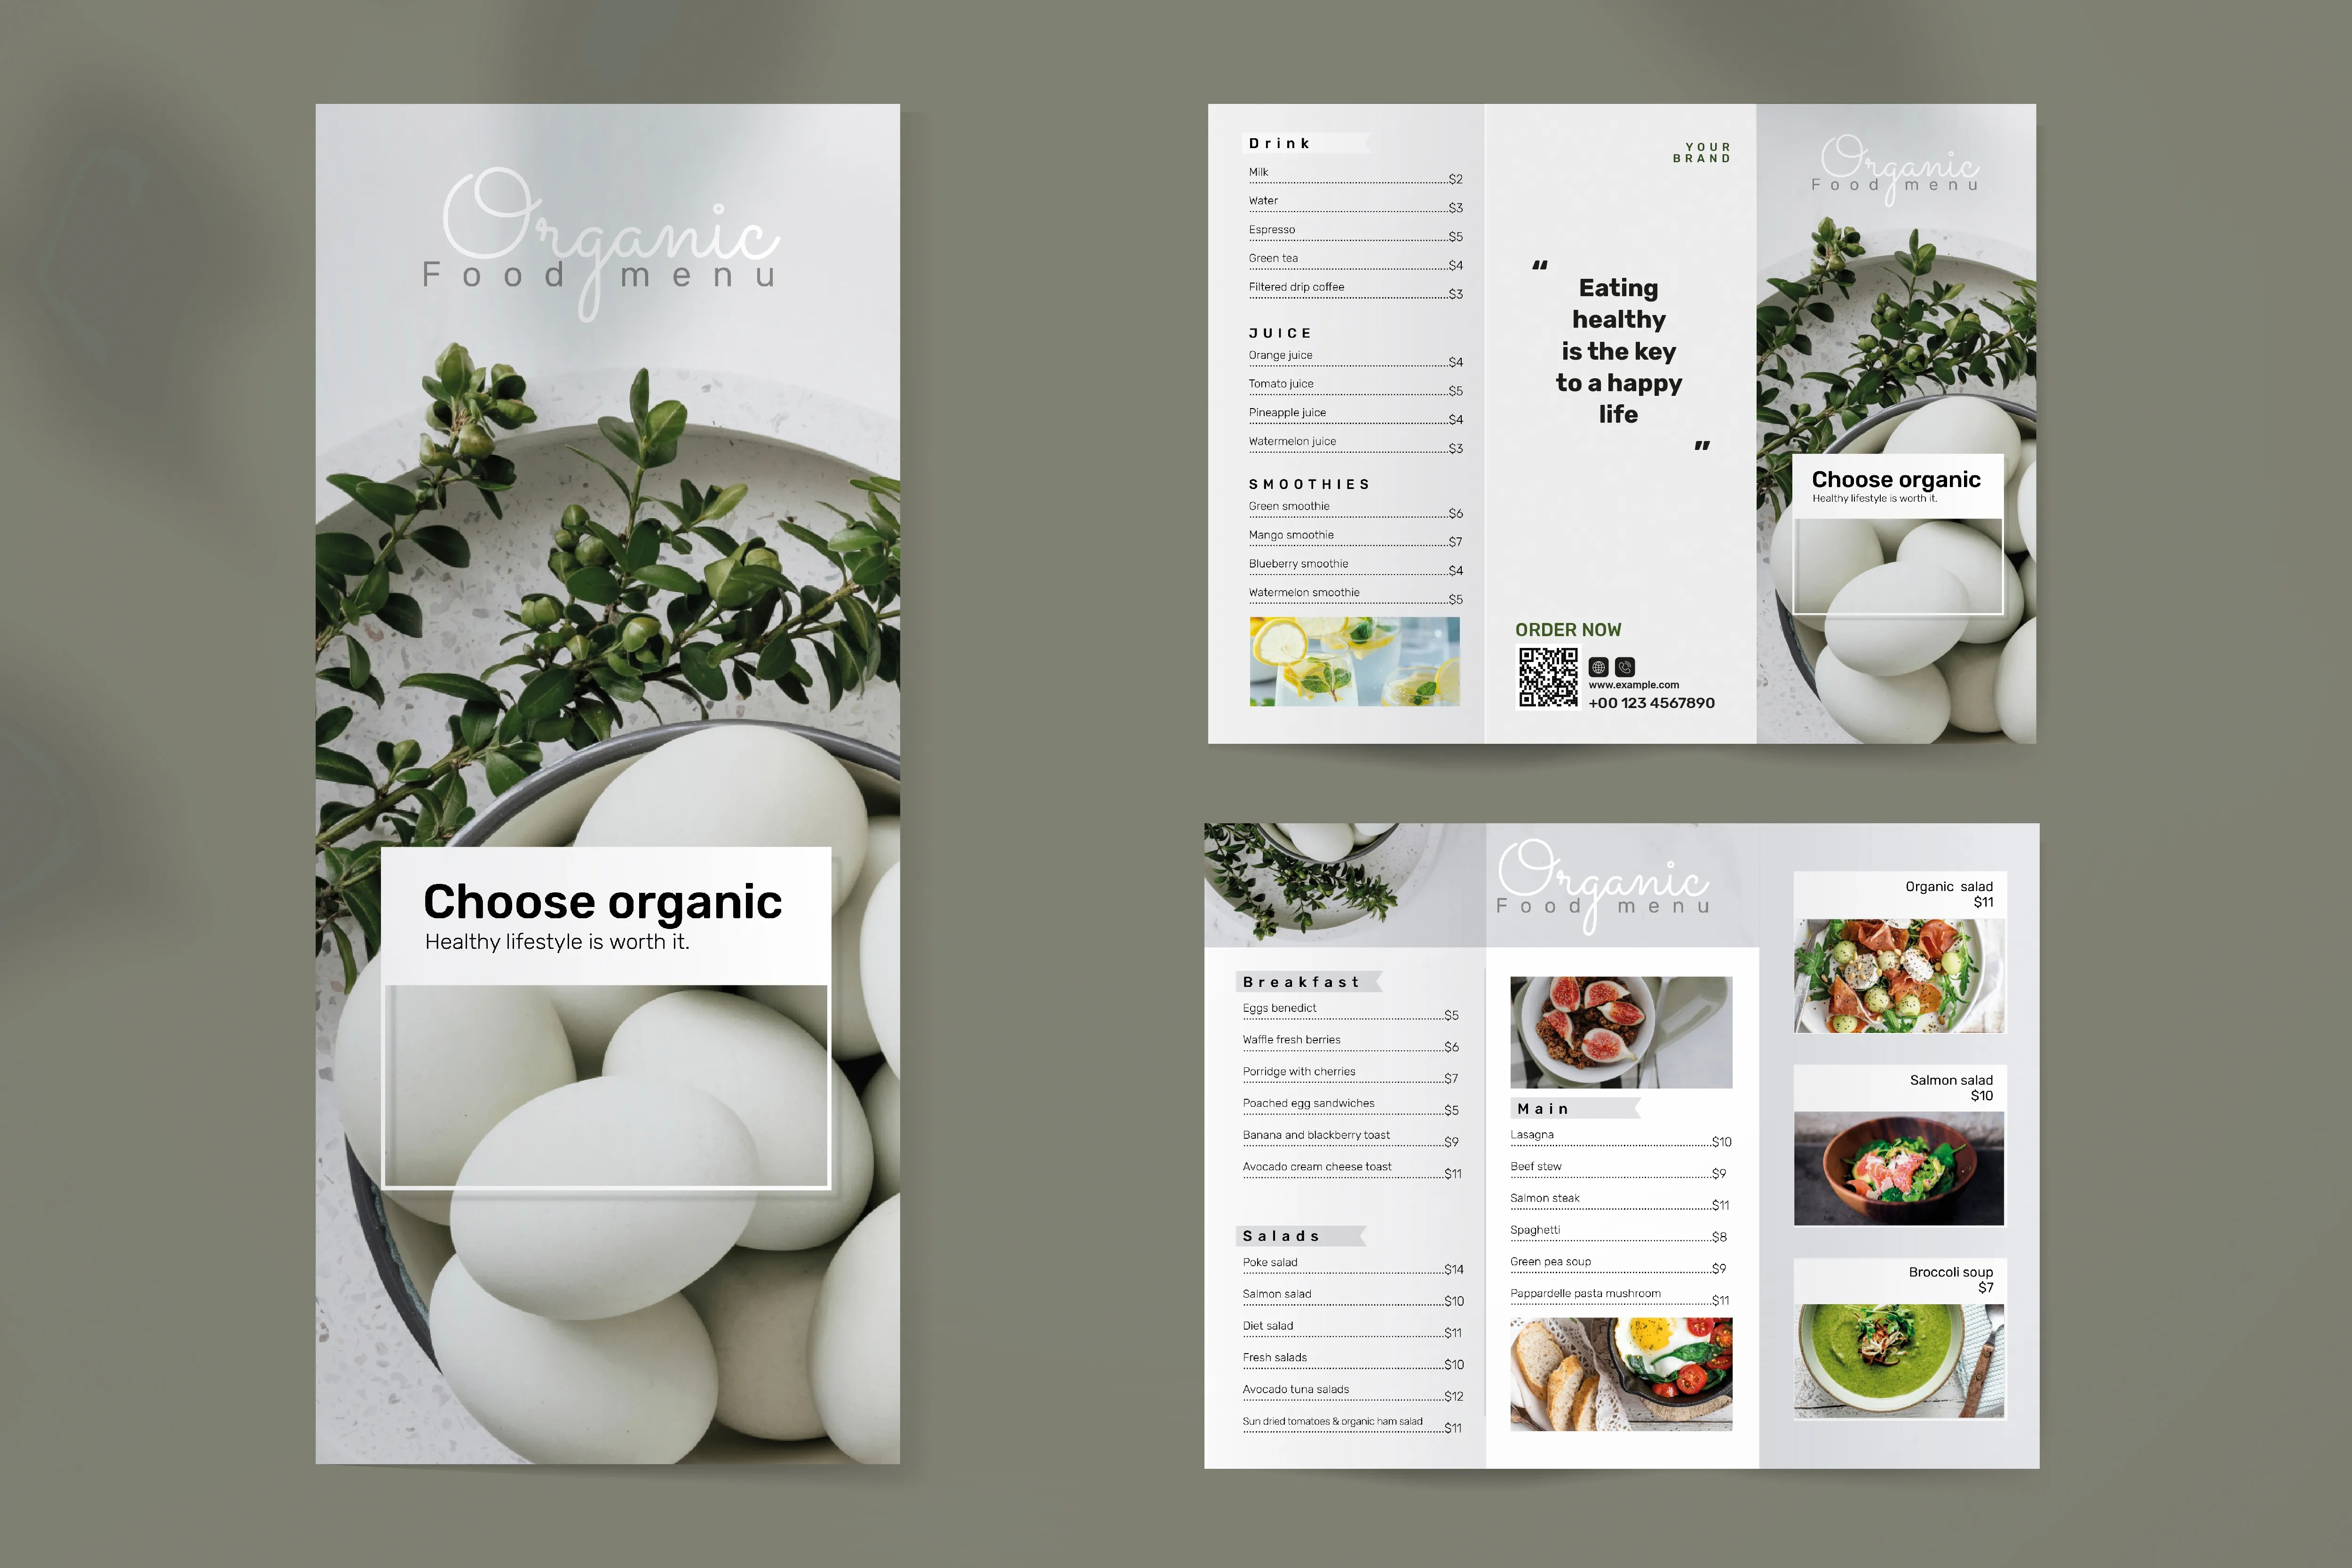 An image of a trifold brochure for an organic food restaurant.